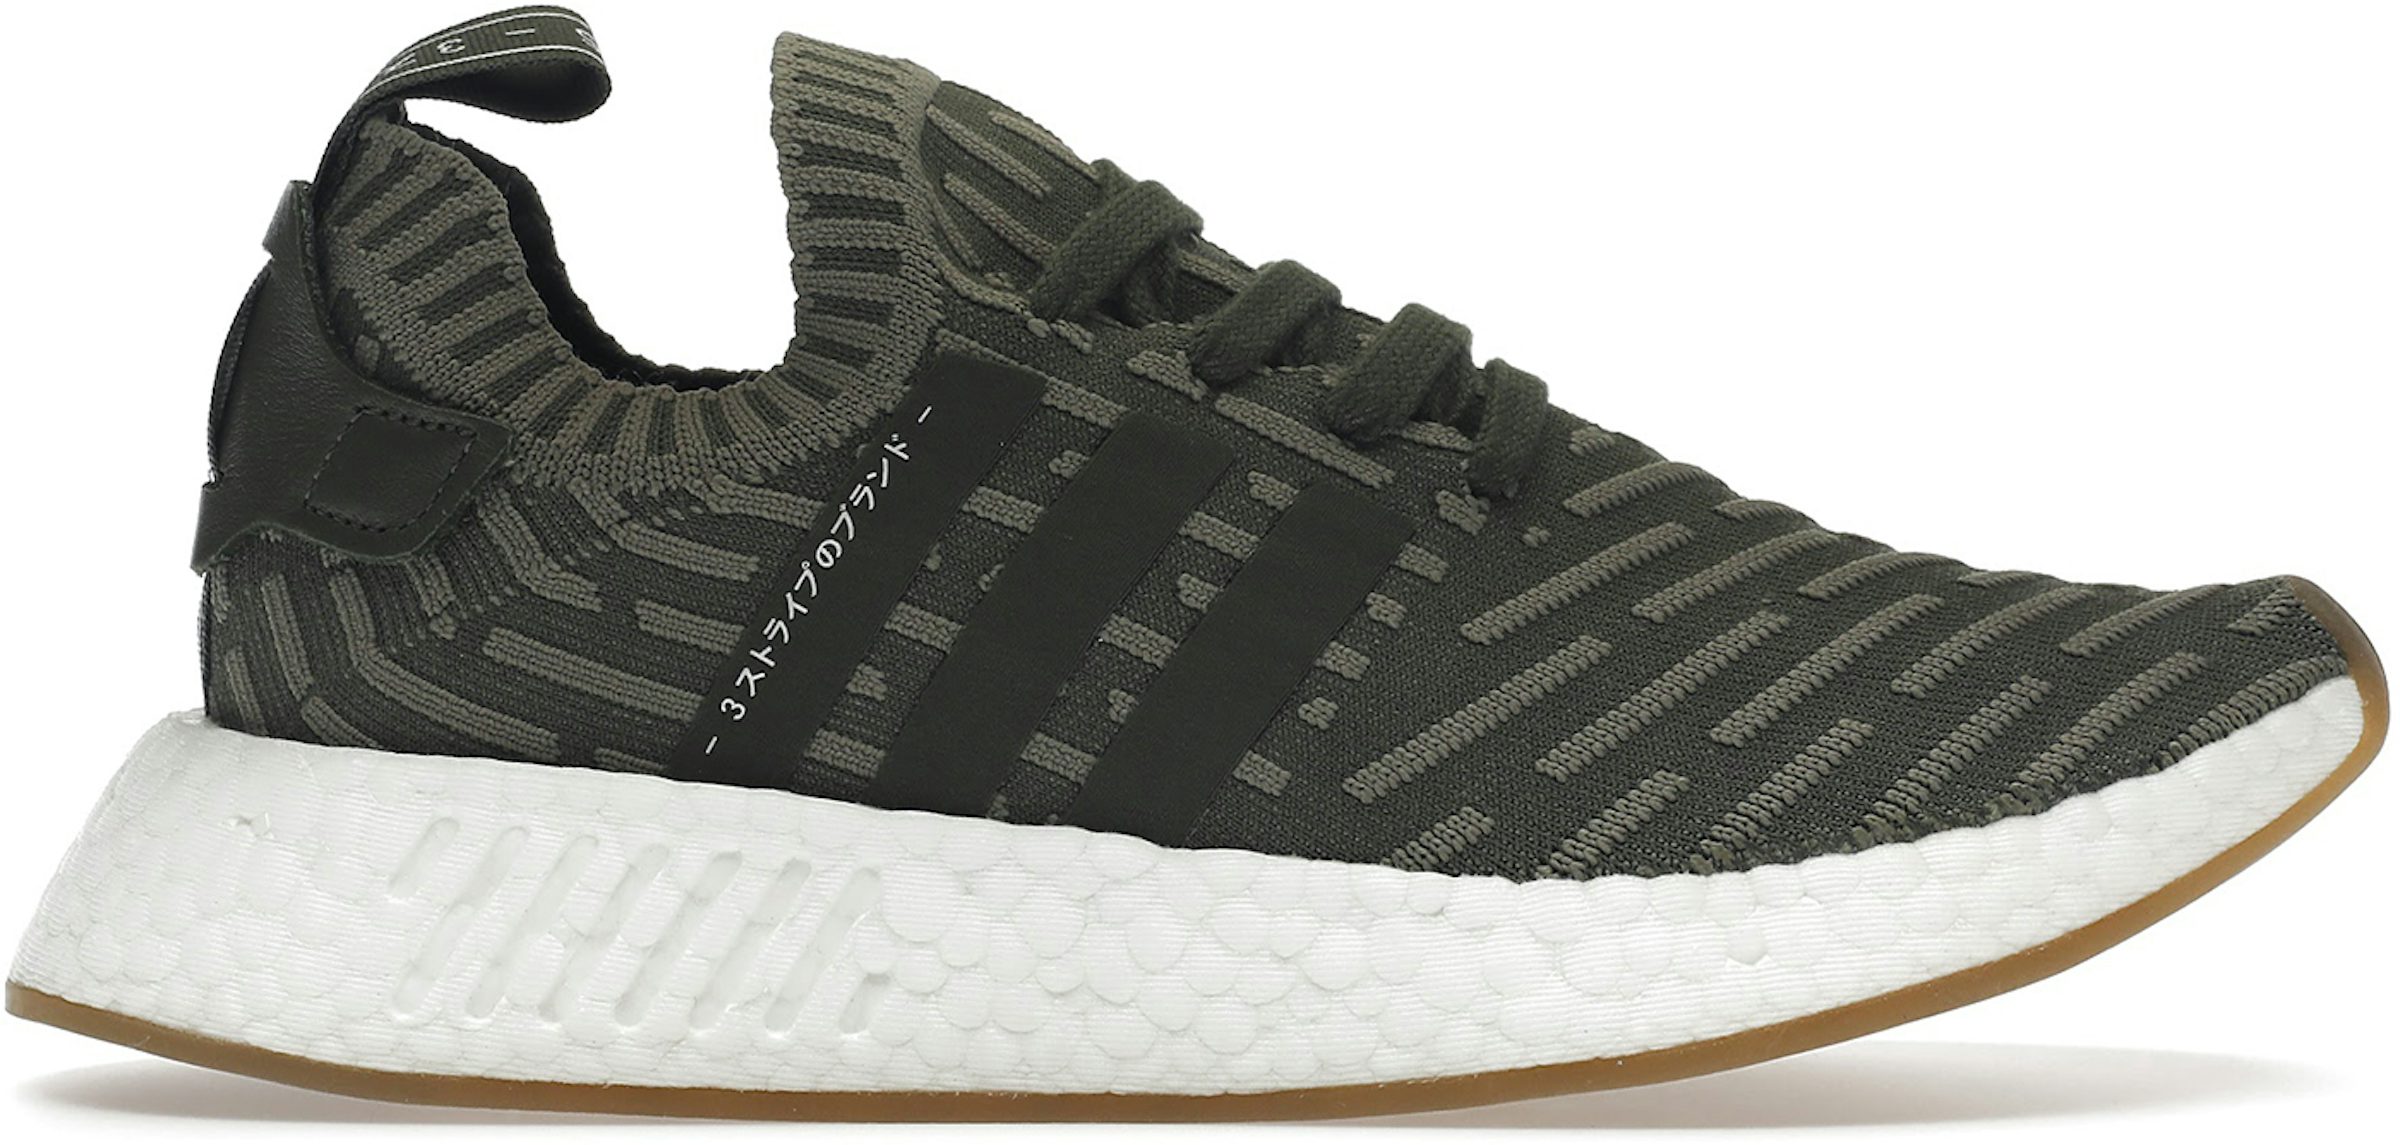 adidas R2 Sargent Major - BY9953 - US